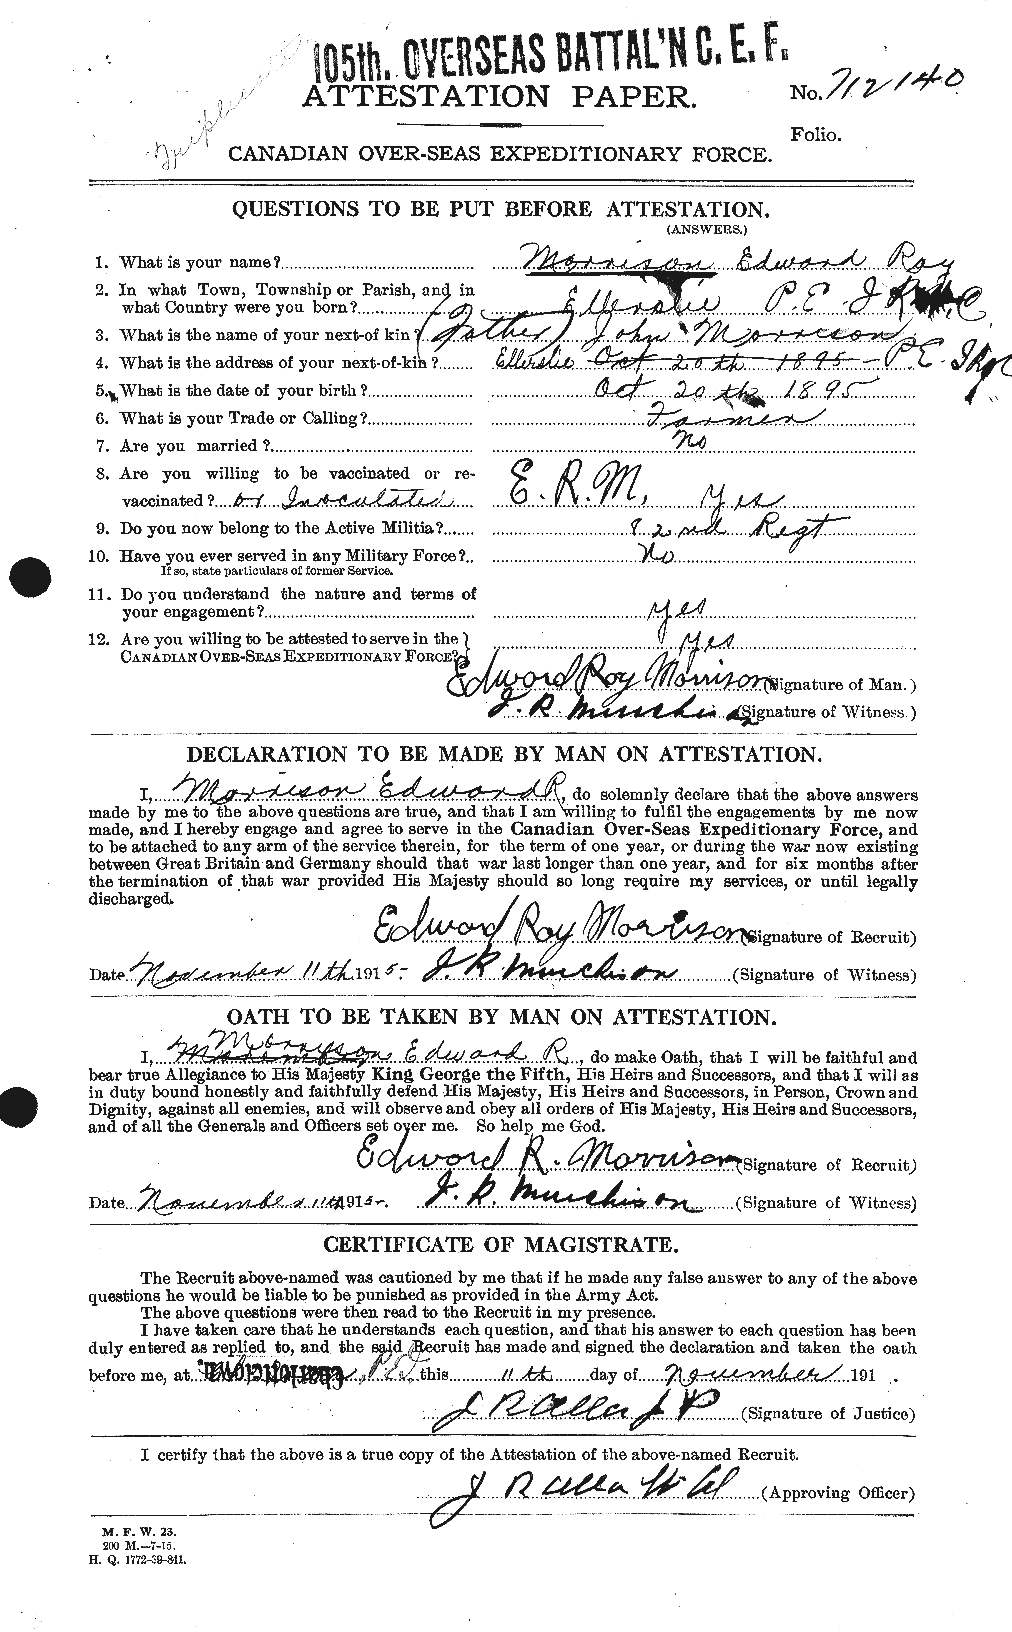 Personnel Records of the First World War - CEF 505501a